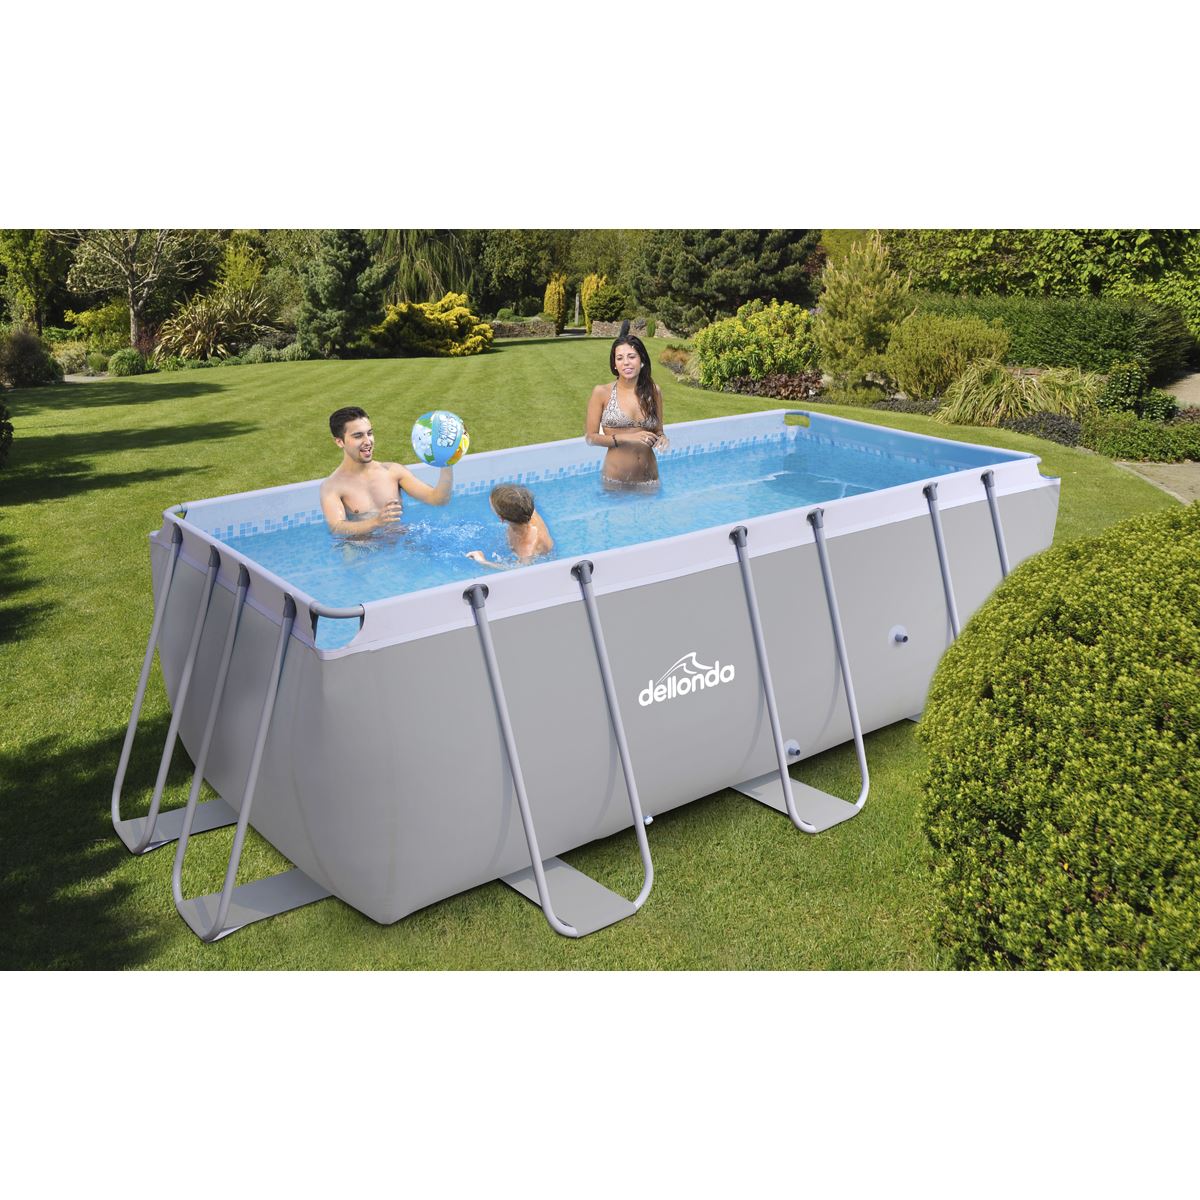 Dellonda 13ft Deluxe Steel Swimming Pool with Filter Pump